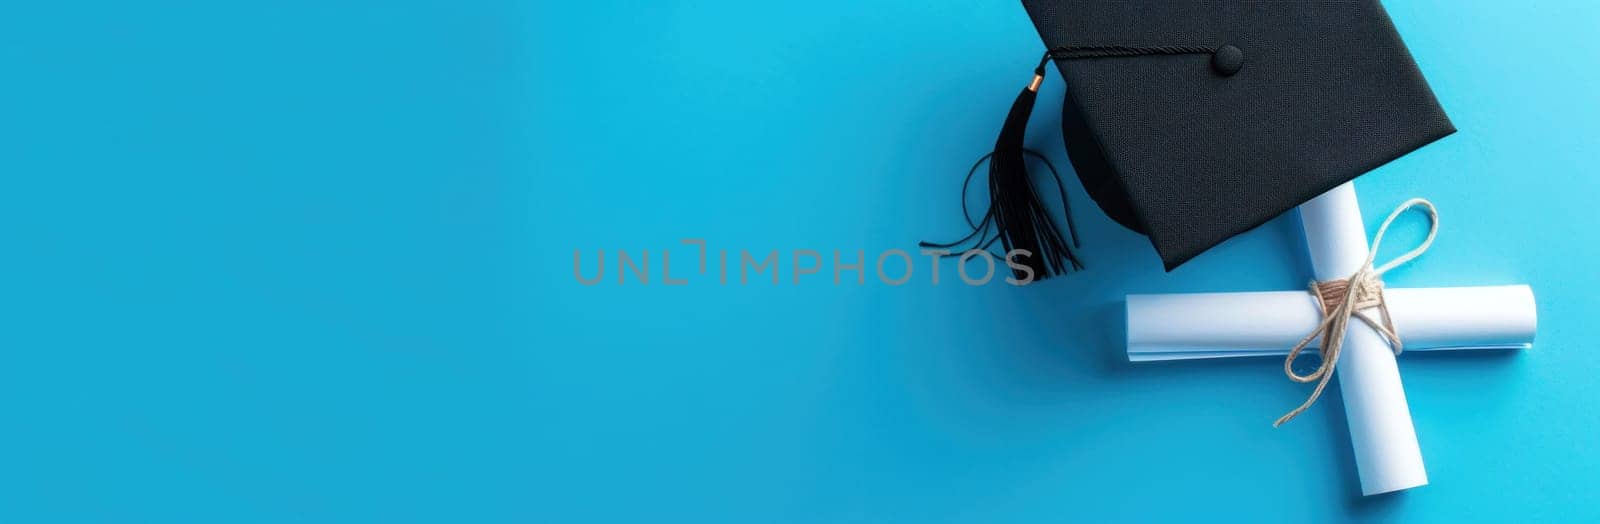 Graduation cap and diploma on blue background with copy space for text or image in education and achievement theme by Vichizh